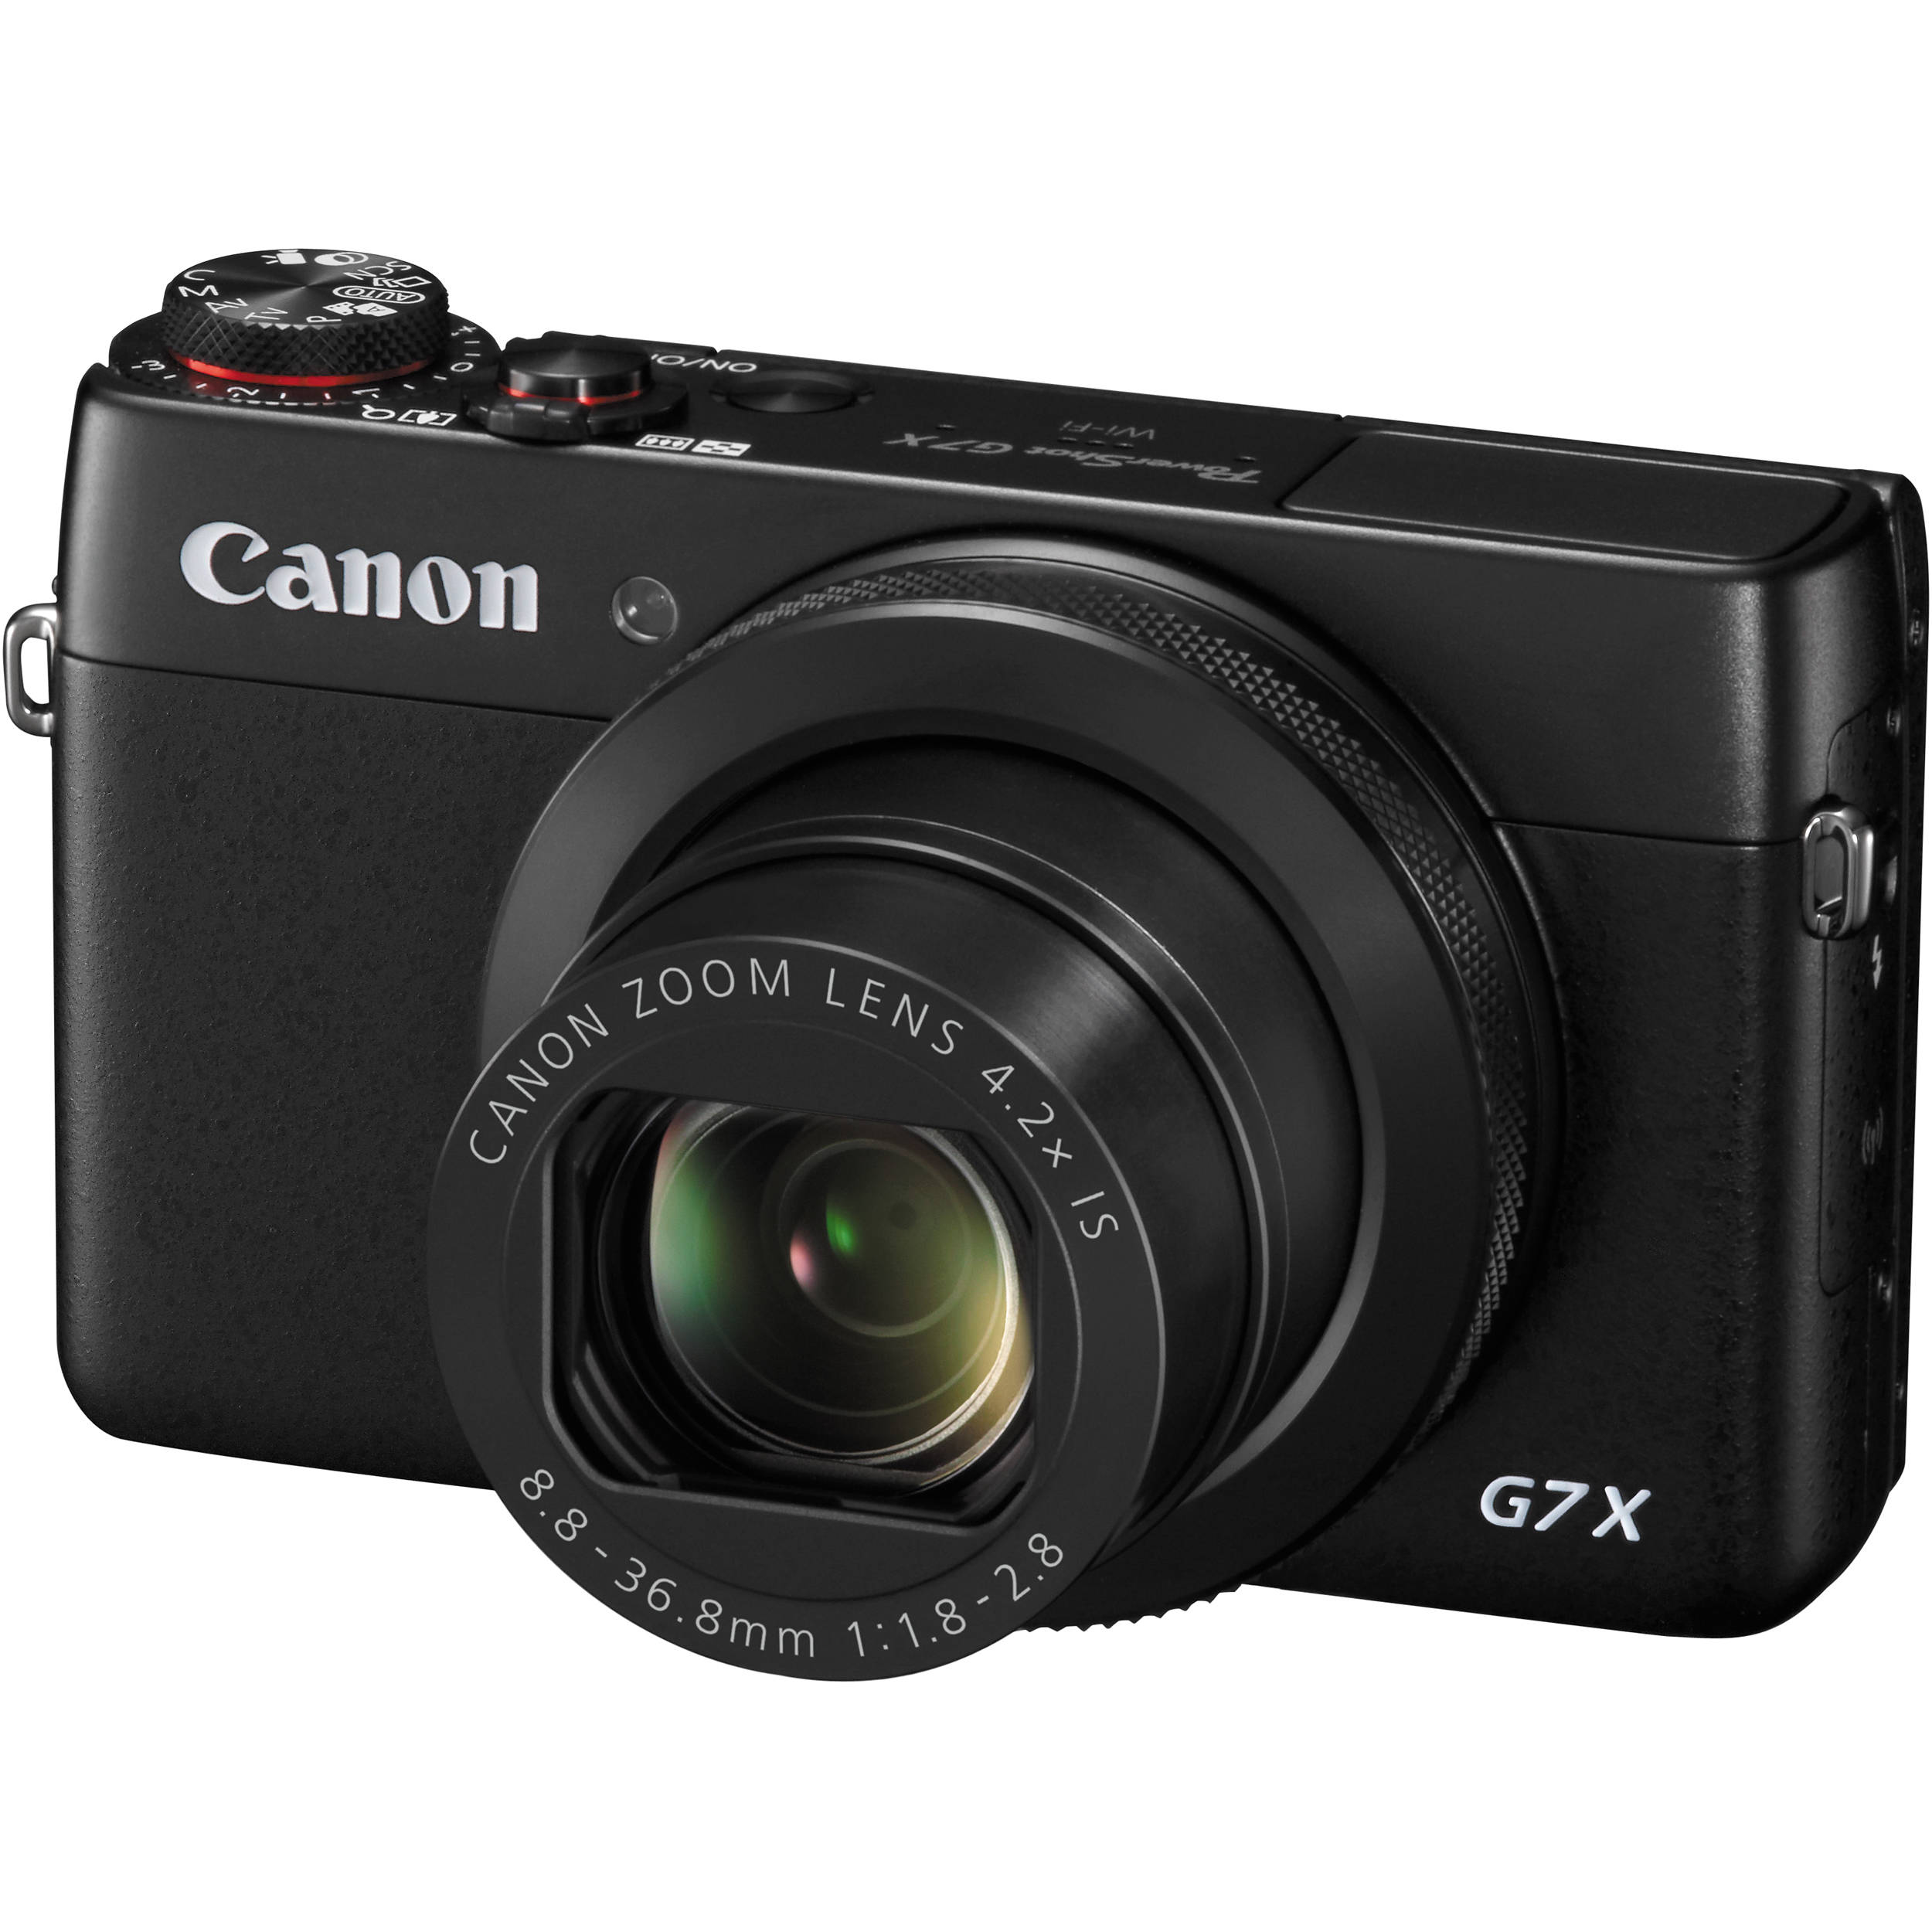 Canon G7x Mark iii- First Video Tests & Vlogging Camera Review 